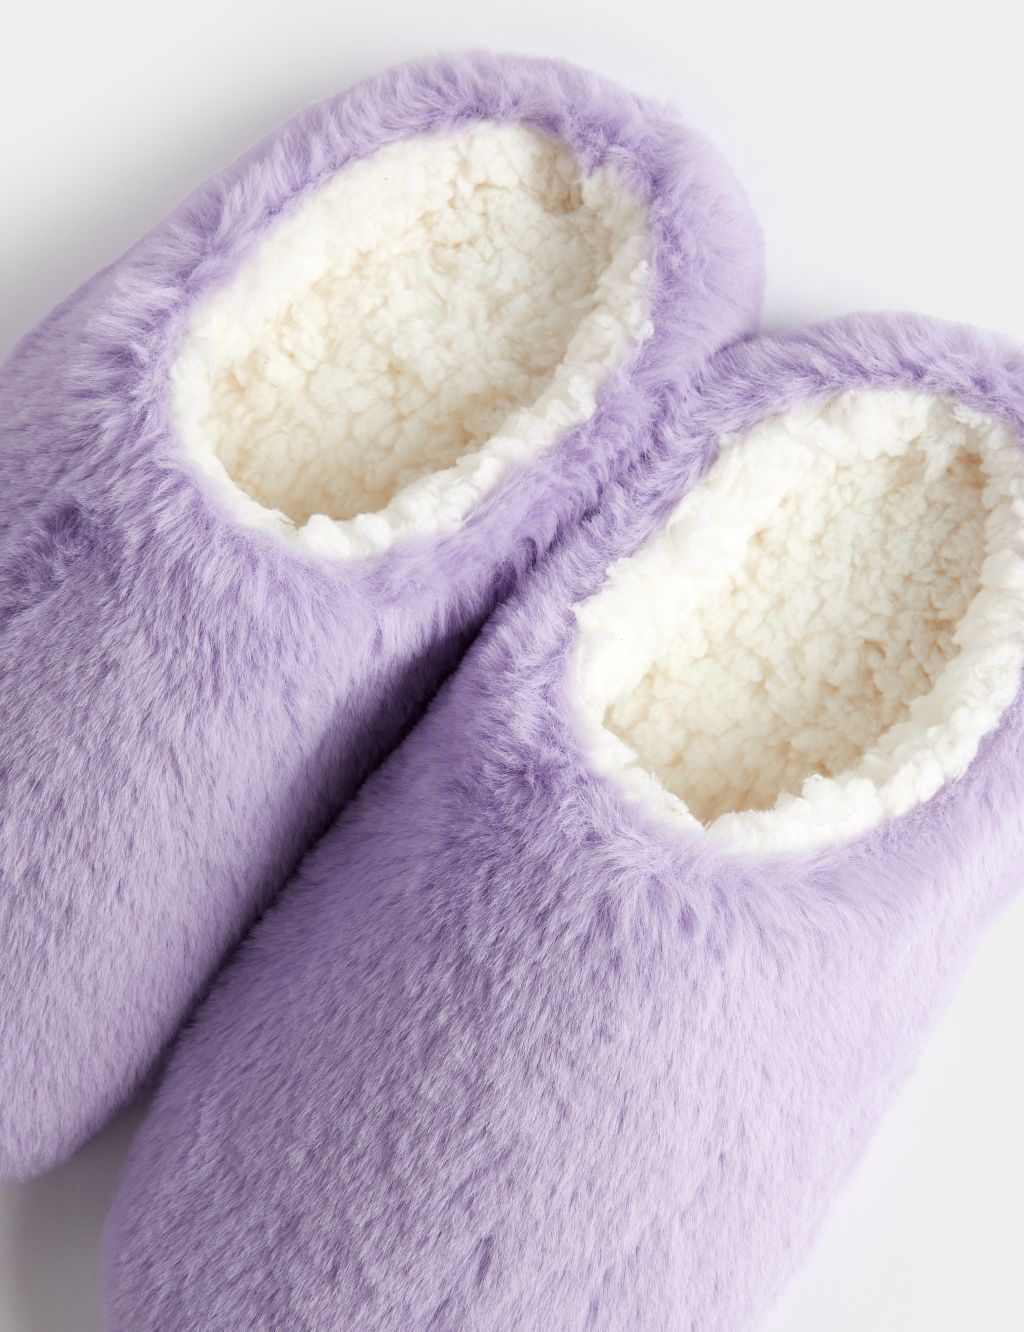 Kids' Faux Fur Slippers (13 Small - 6 Large) image 3